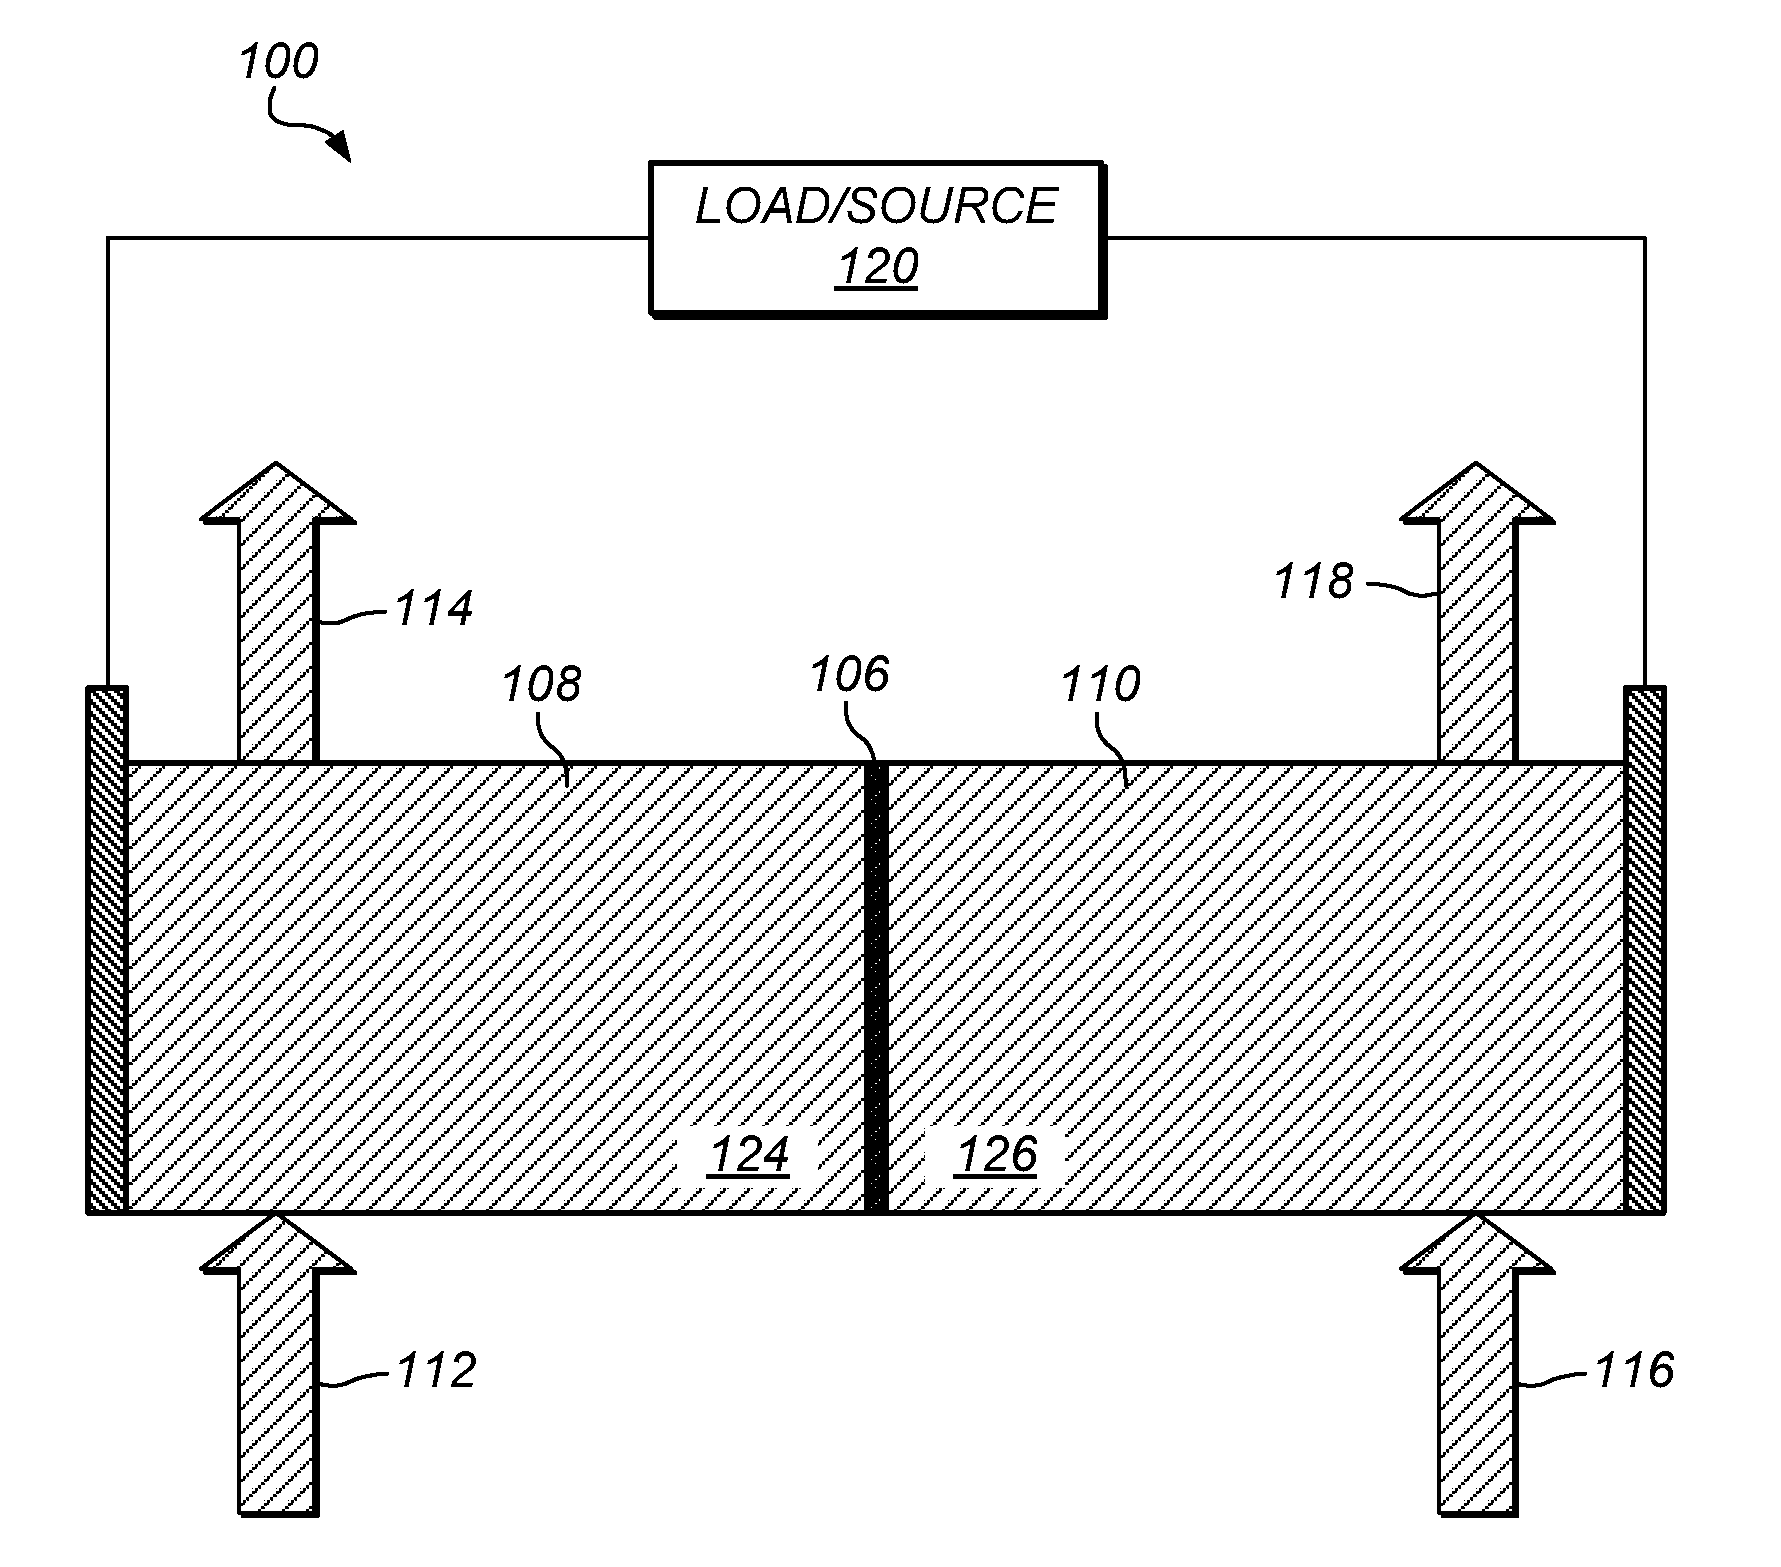 Preparation of flow cell battery electrolytes from raw materials